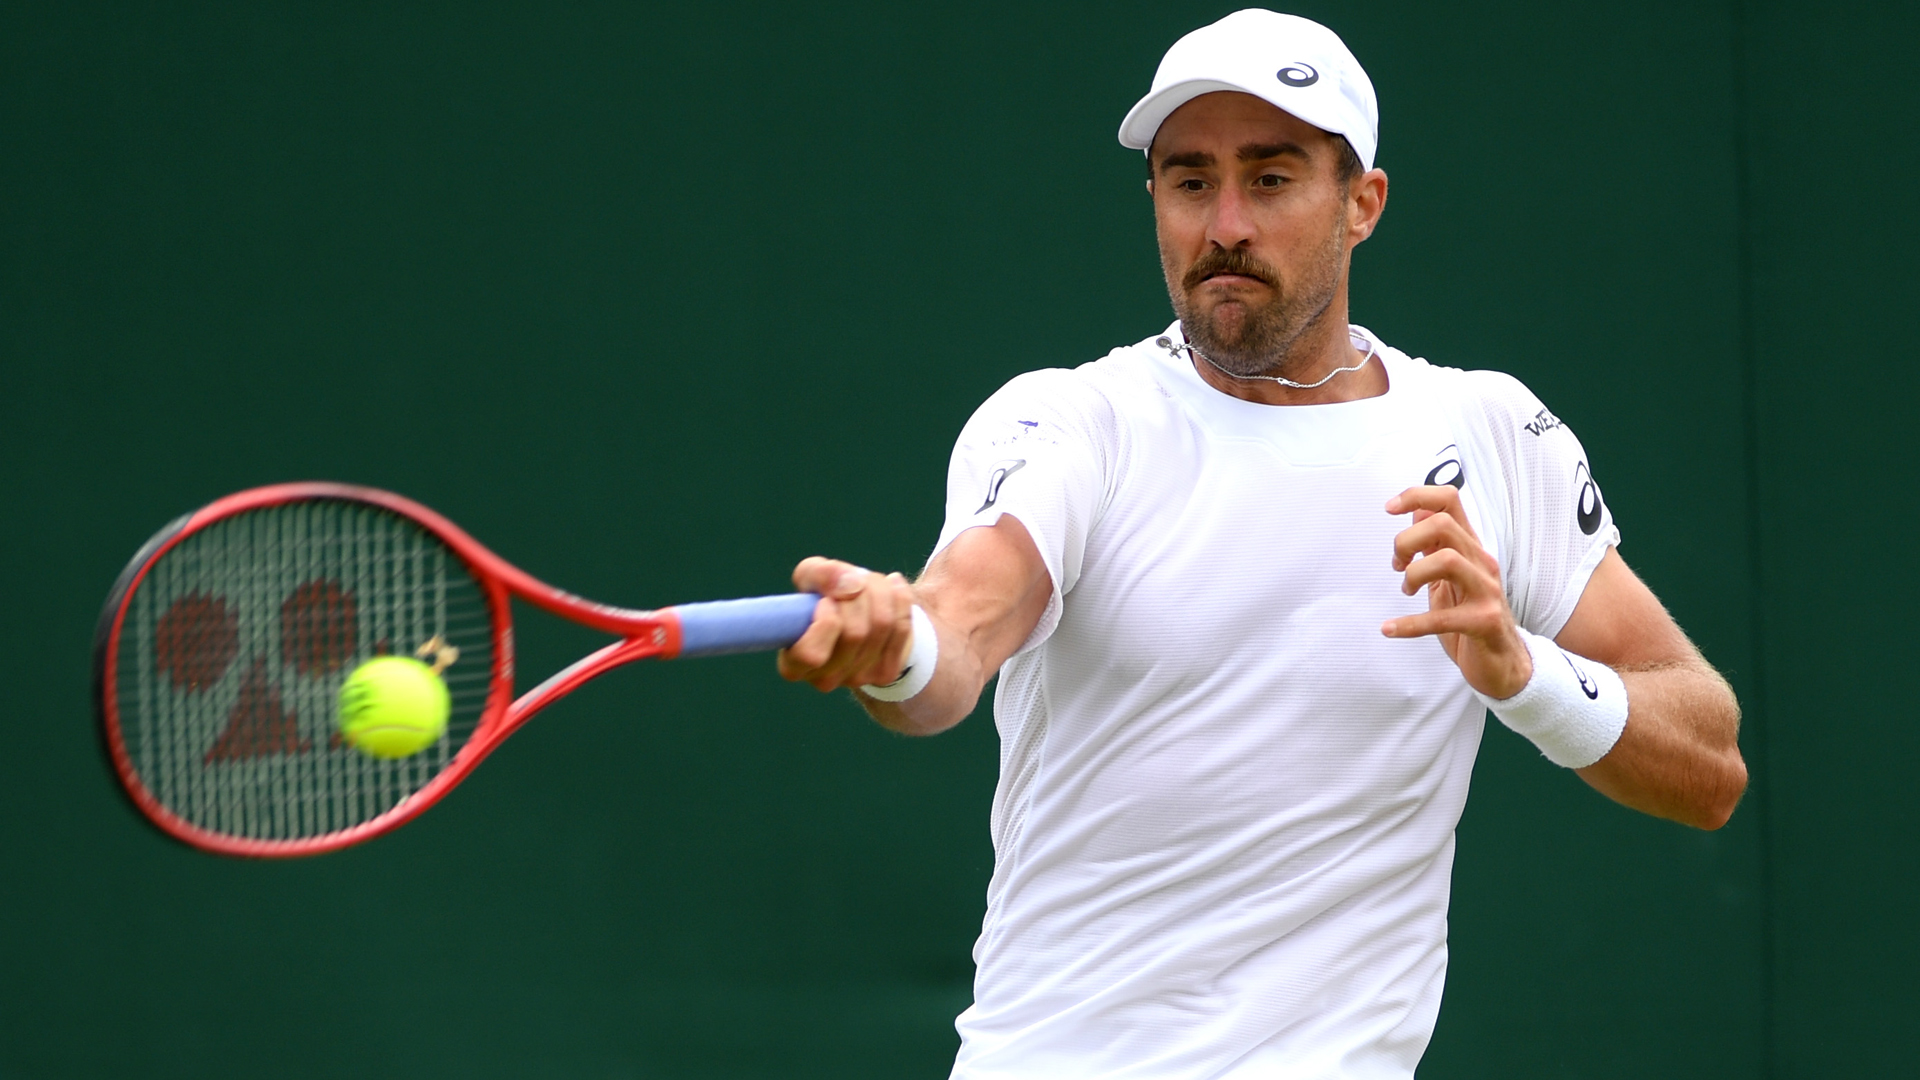 Defending champion Steve Johnson made an early exit at the Hall of Fame Tennis Championships.